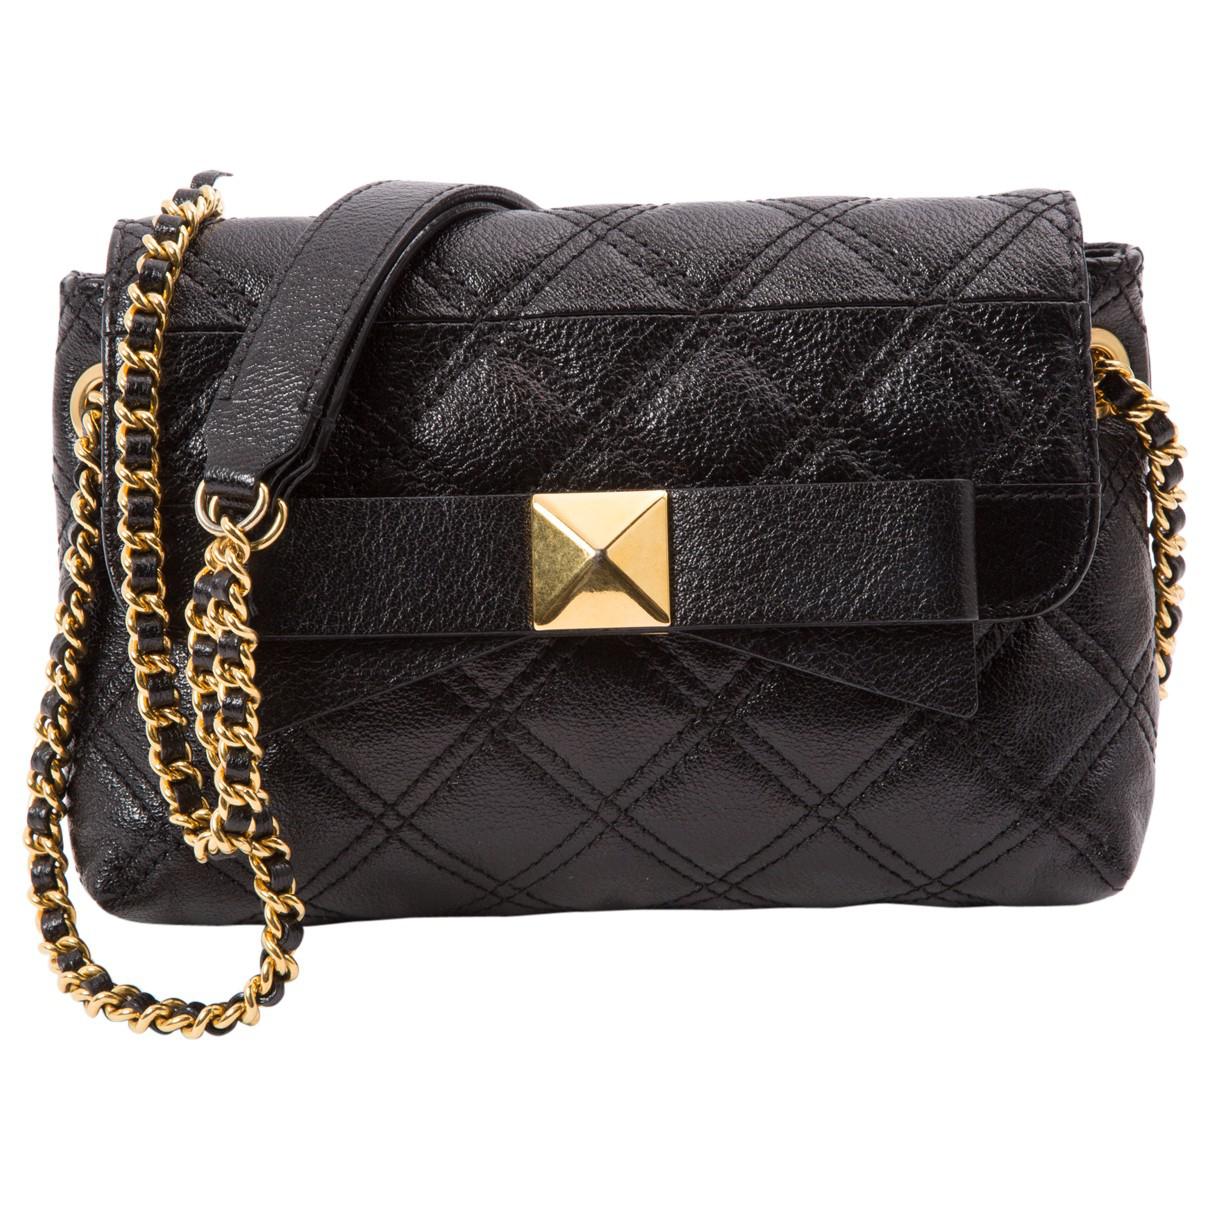 Lyst - Marc Jacobs Pre-owned Black Leather Handbags in Black